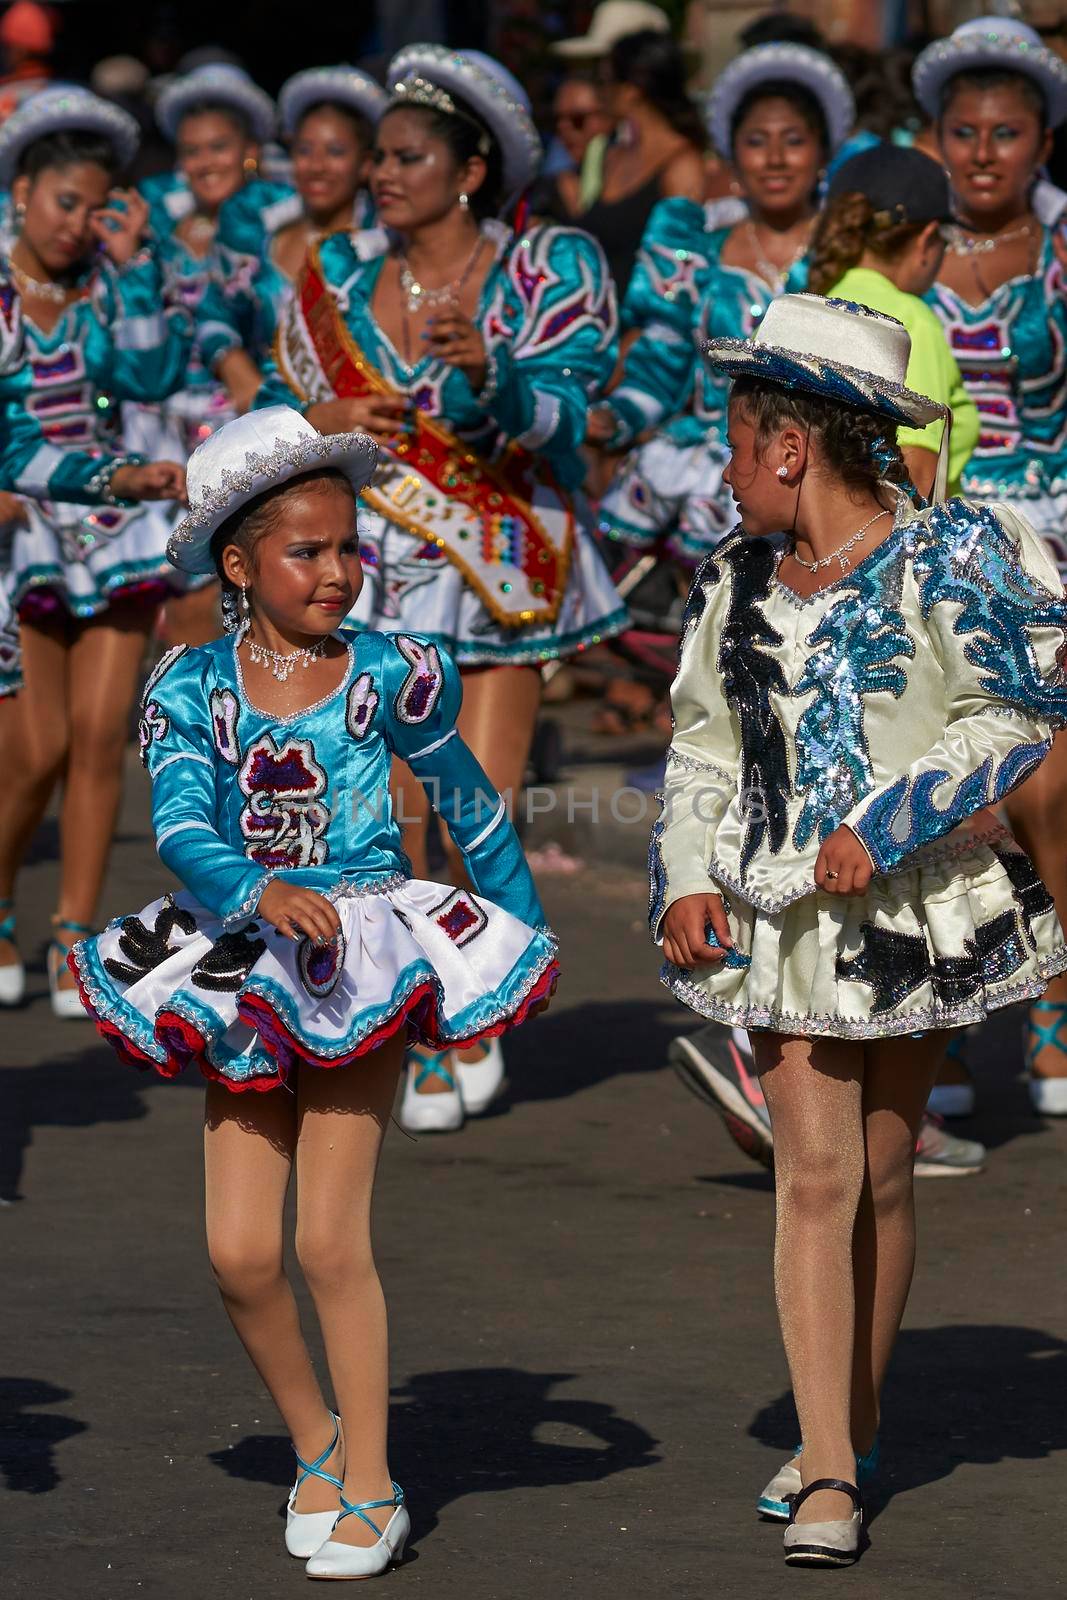 Caporales dancers at the Arica Carnival by JeremyRichards